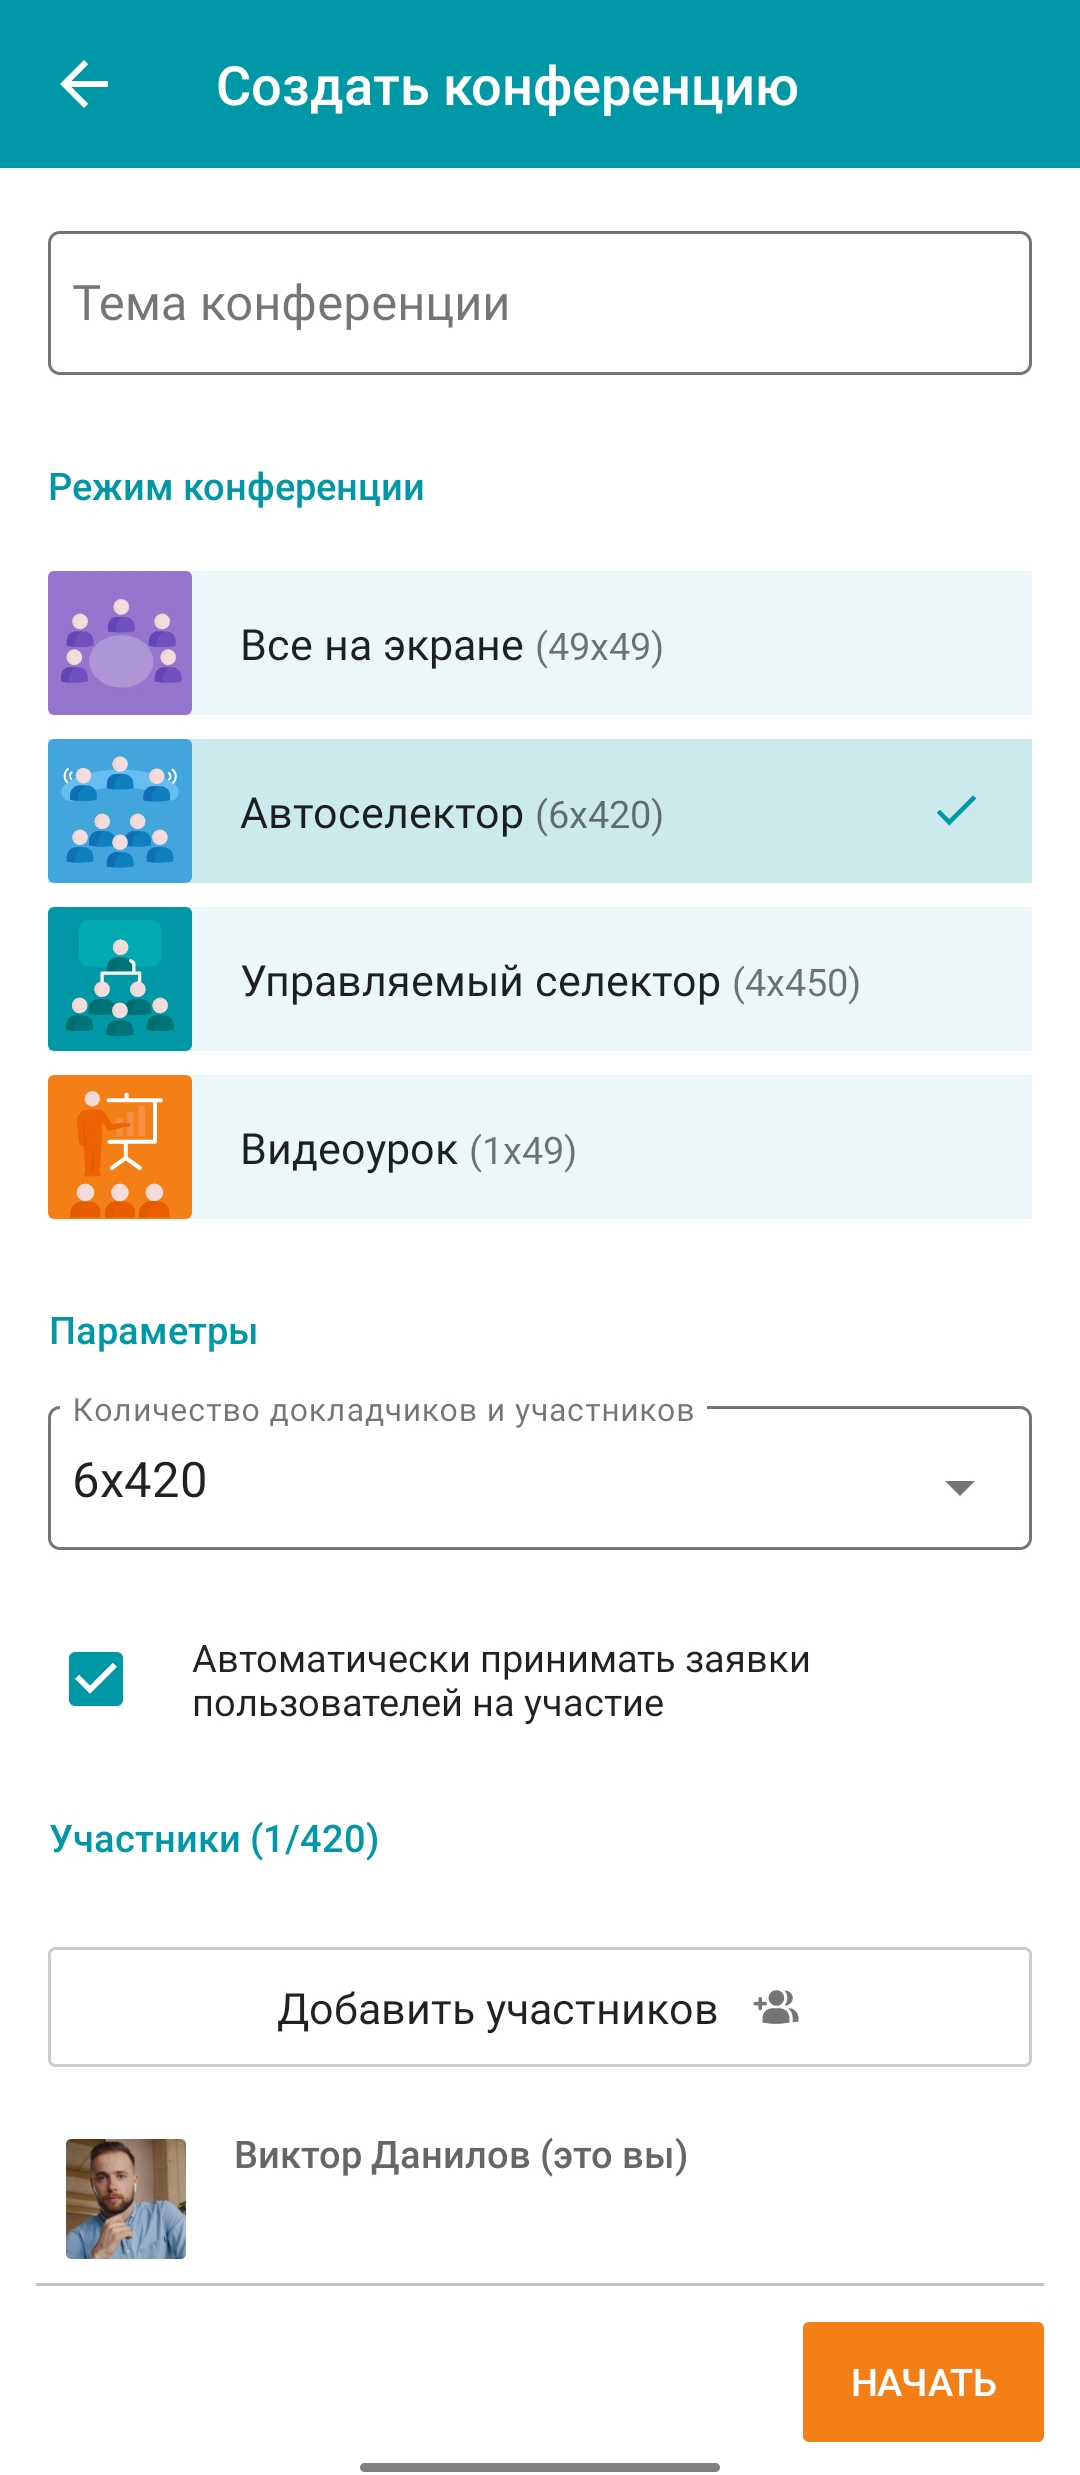 /client-android/media/create_conference/ru.png